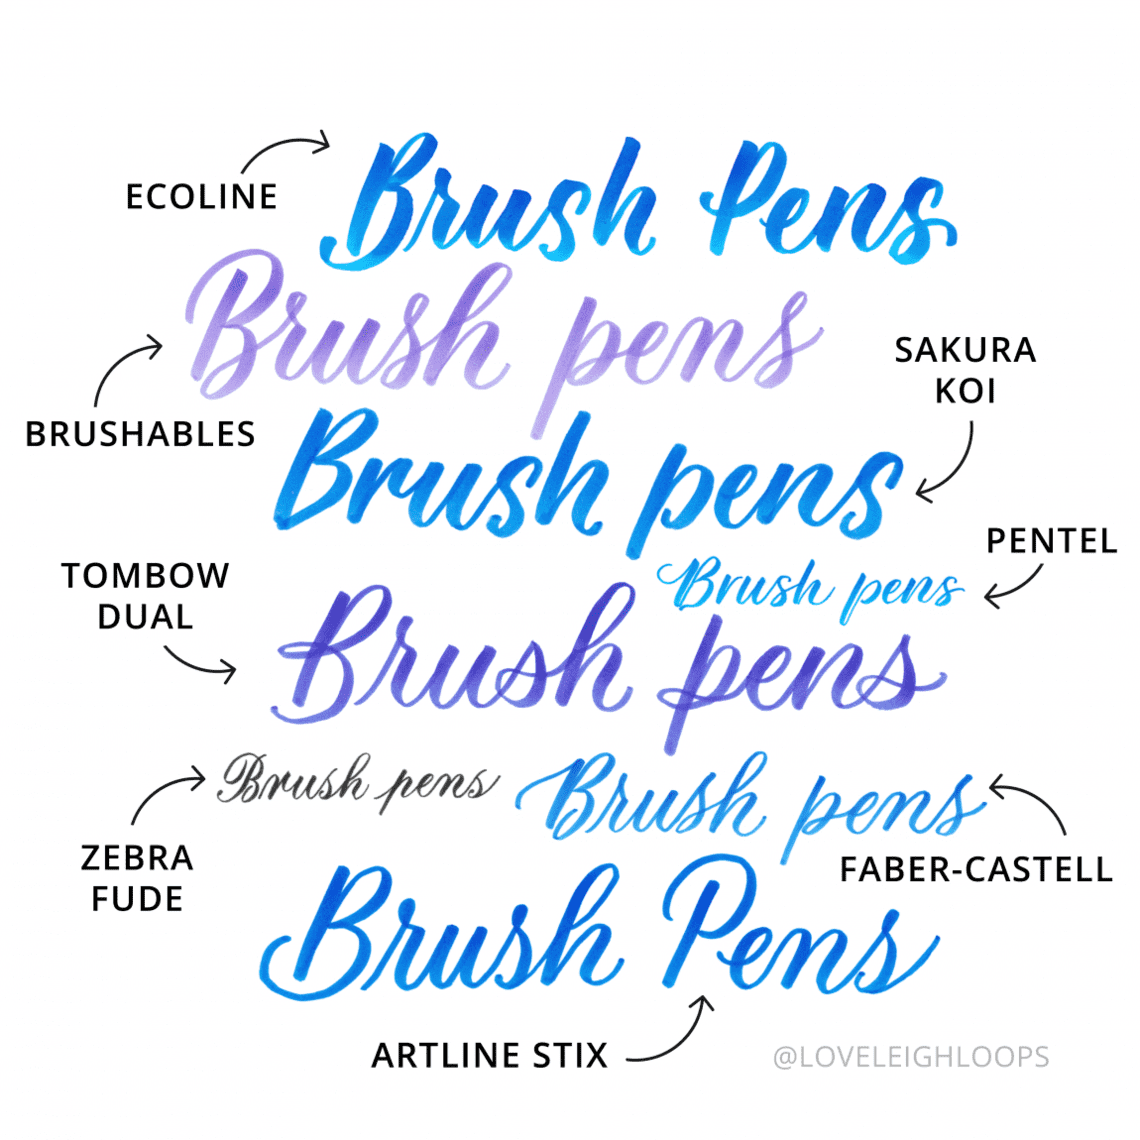 How To Do Brush Lettering - The Ultimate Guide (2023)